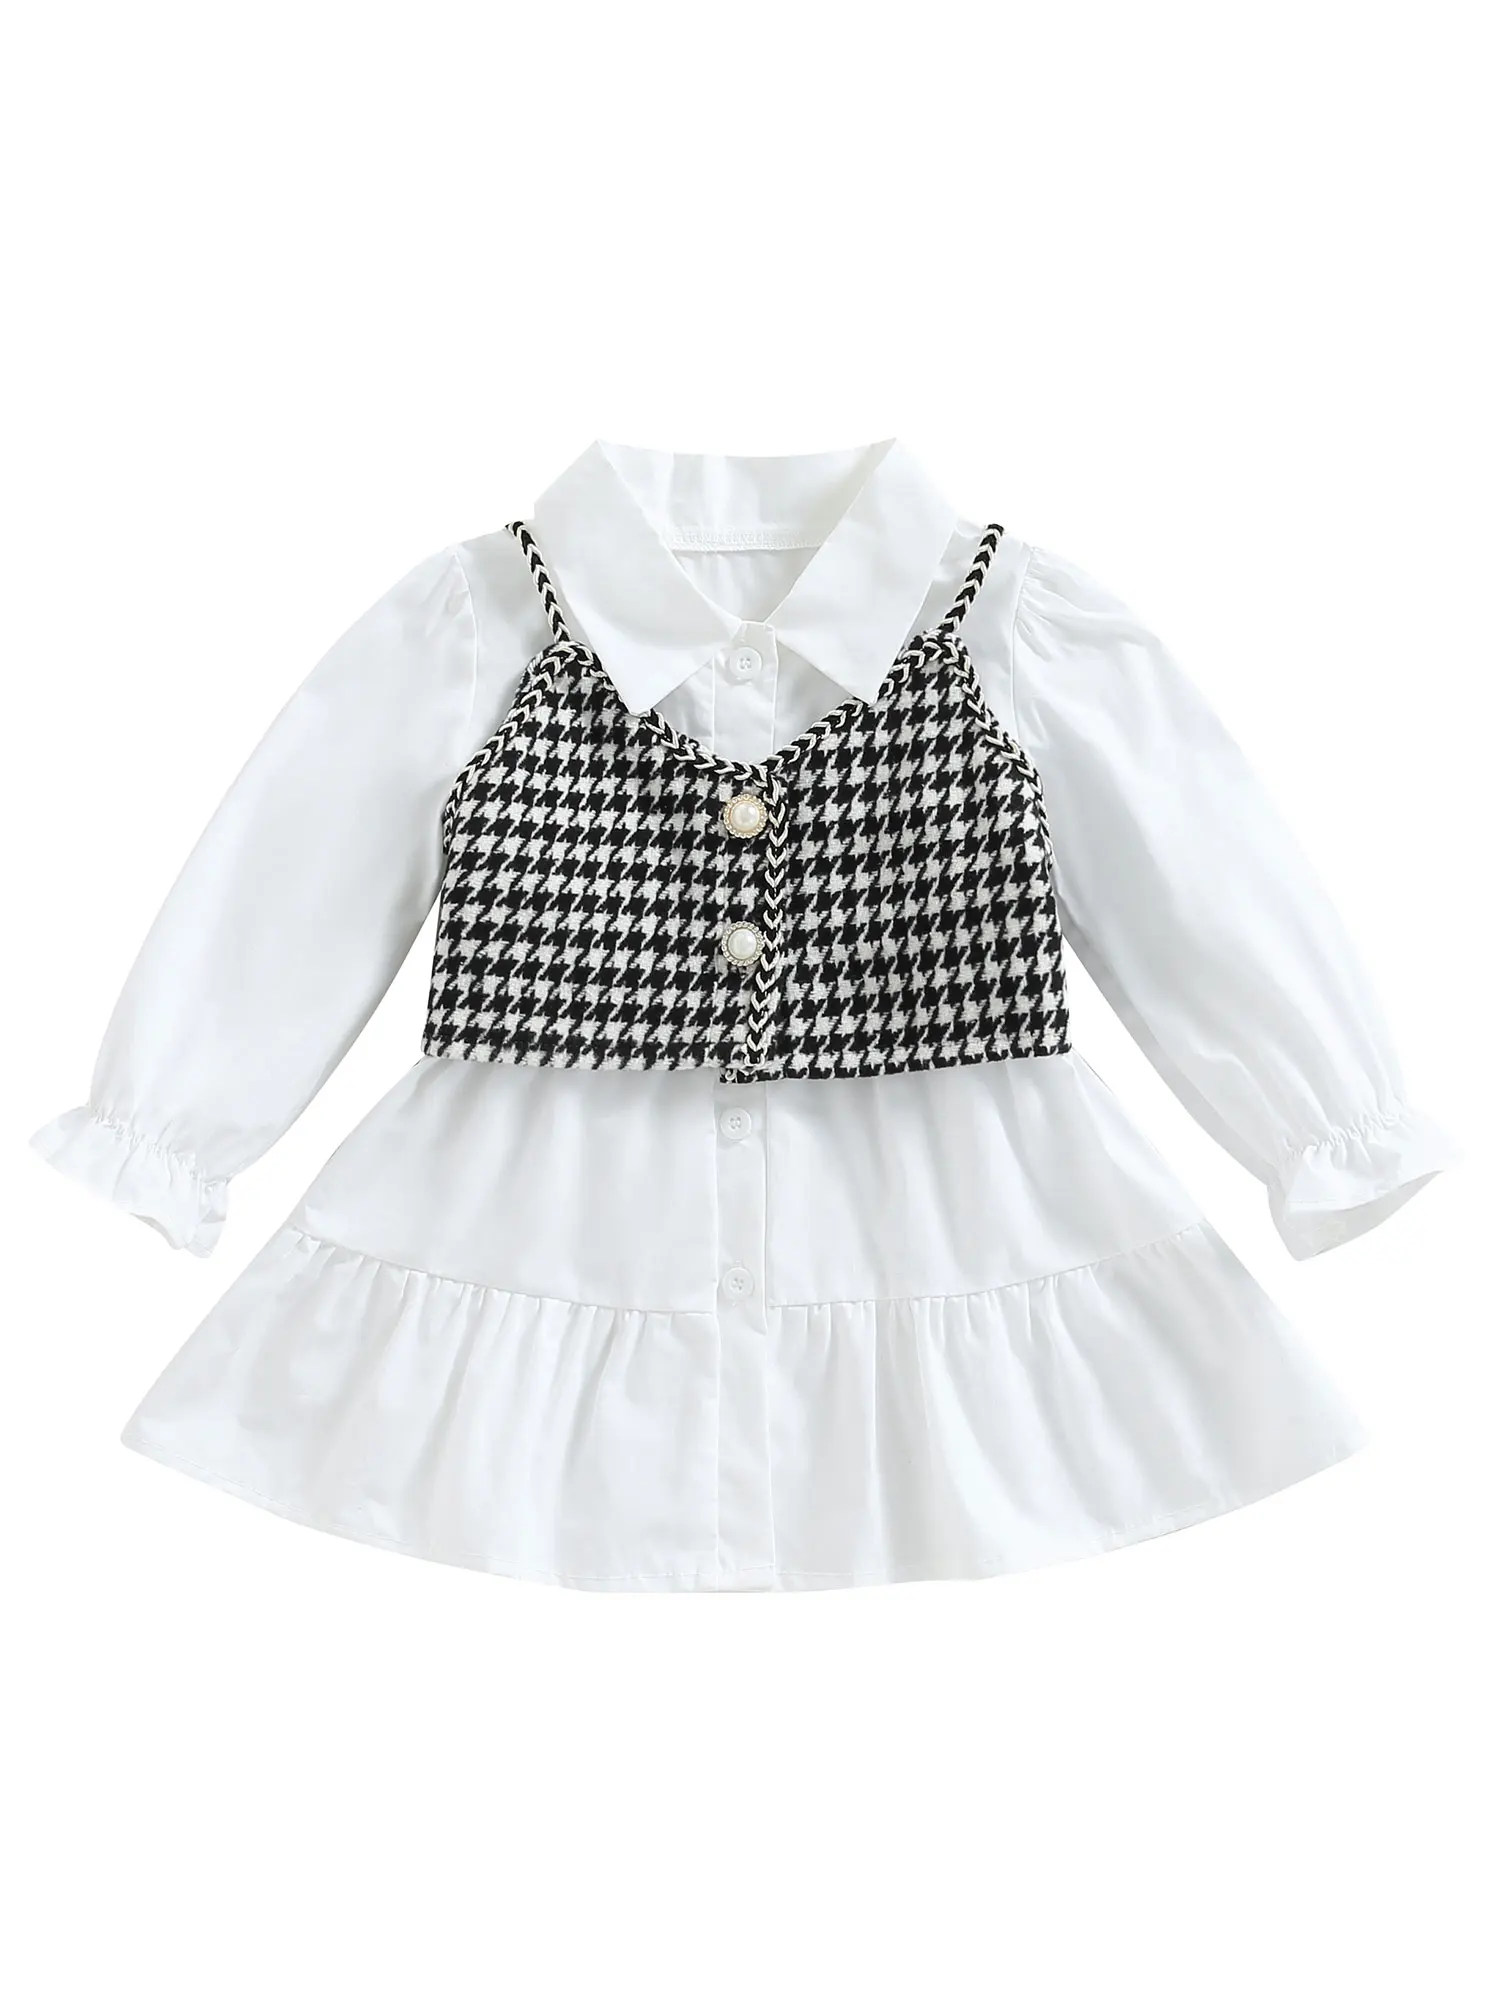 

Kid Girl Summer Outfits Long Sleeve Solid Color Lapel Shirt Dress Houndstooth Cami Tops 1-6Y 2Pcs Set